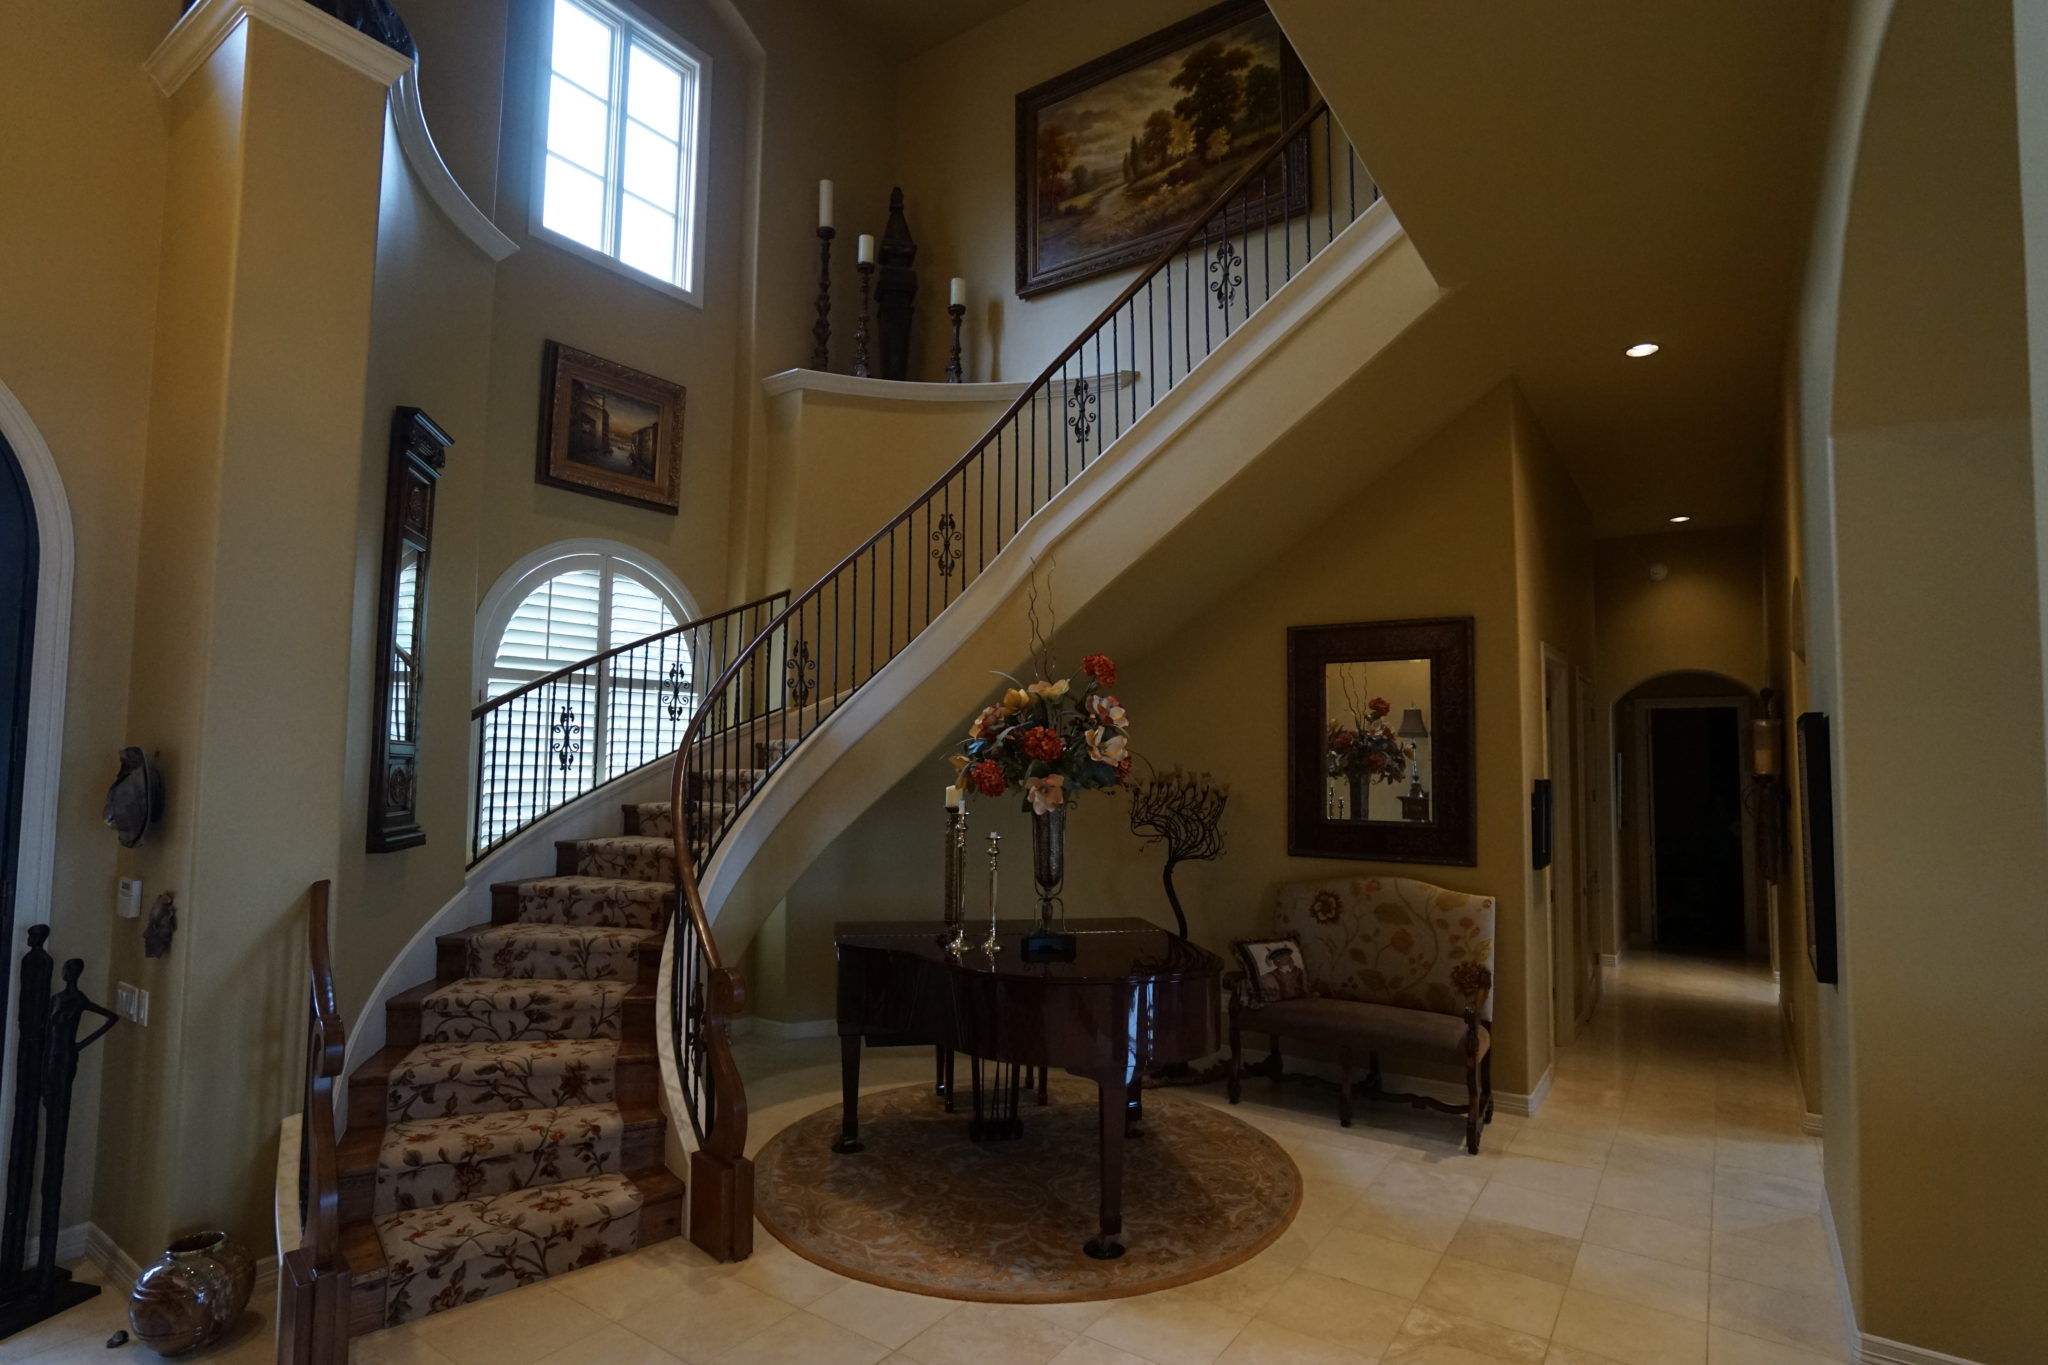 Curling Staircases and Front Entry Ways